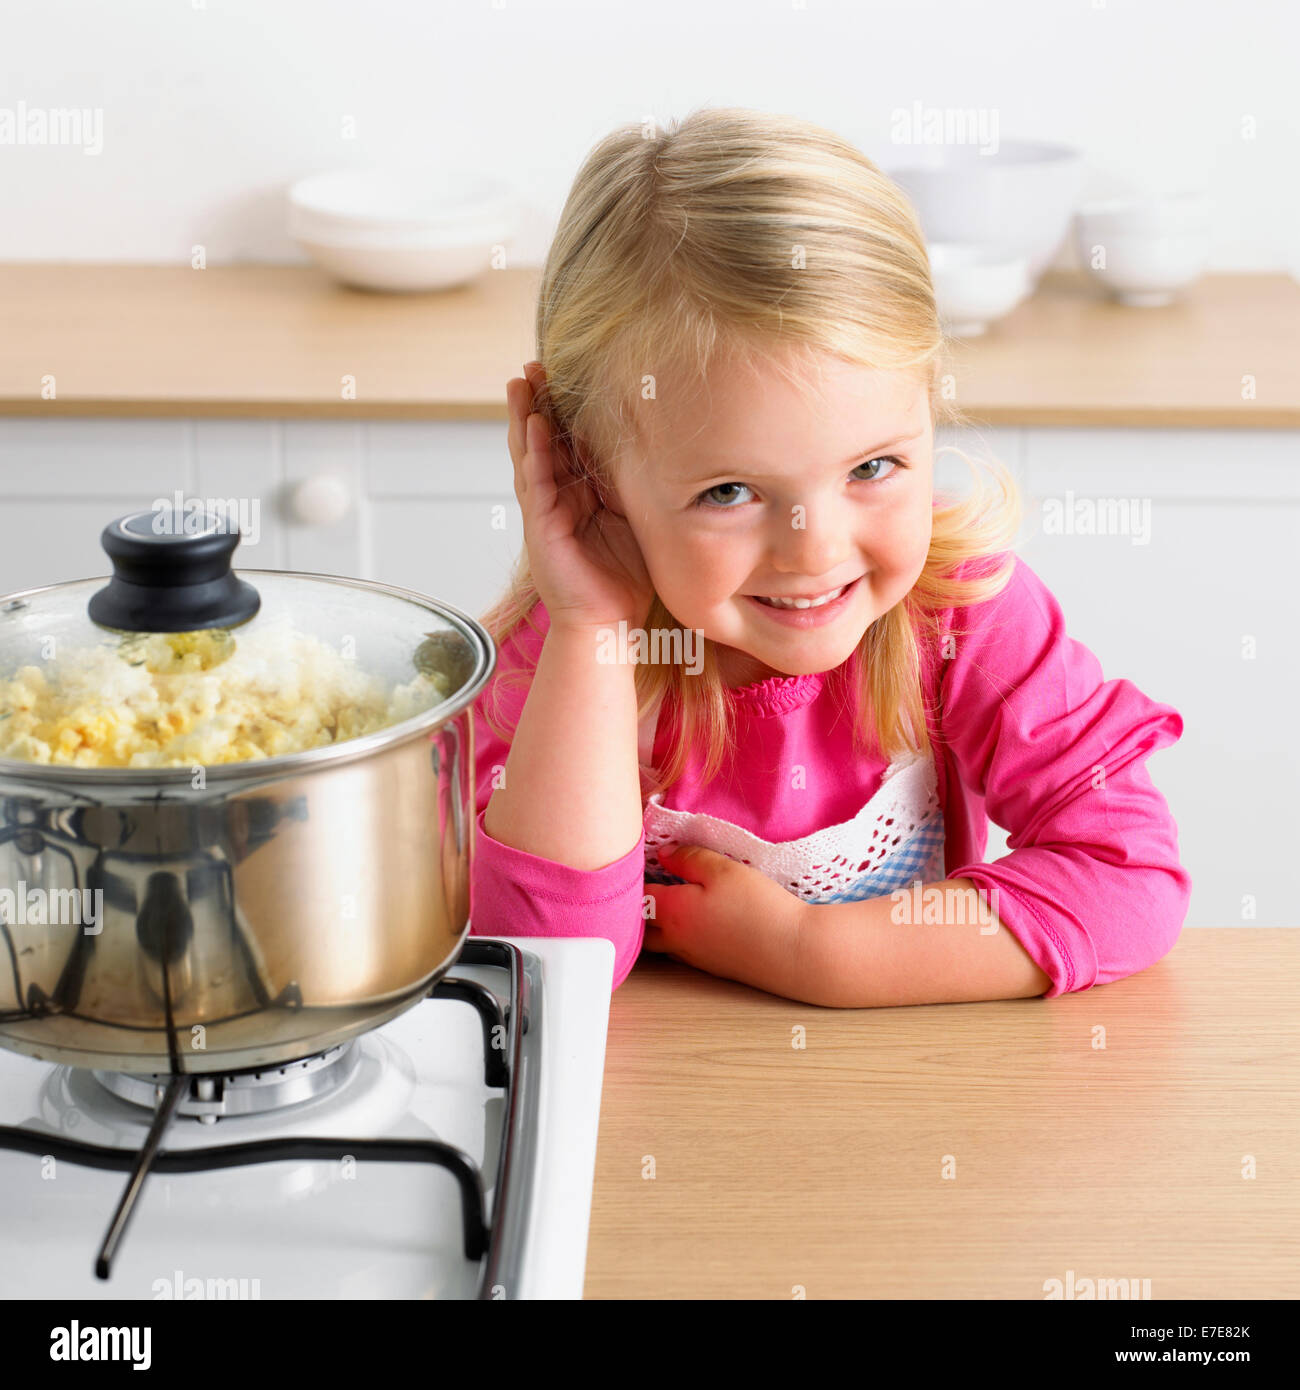 Girl listening to popcorn popping dans une casserole Banque D'Images